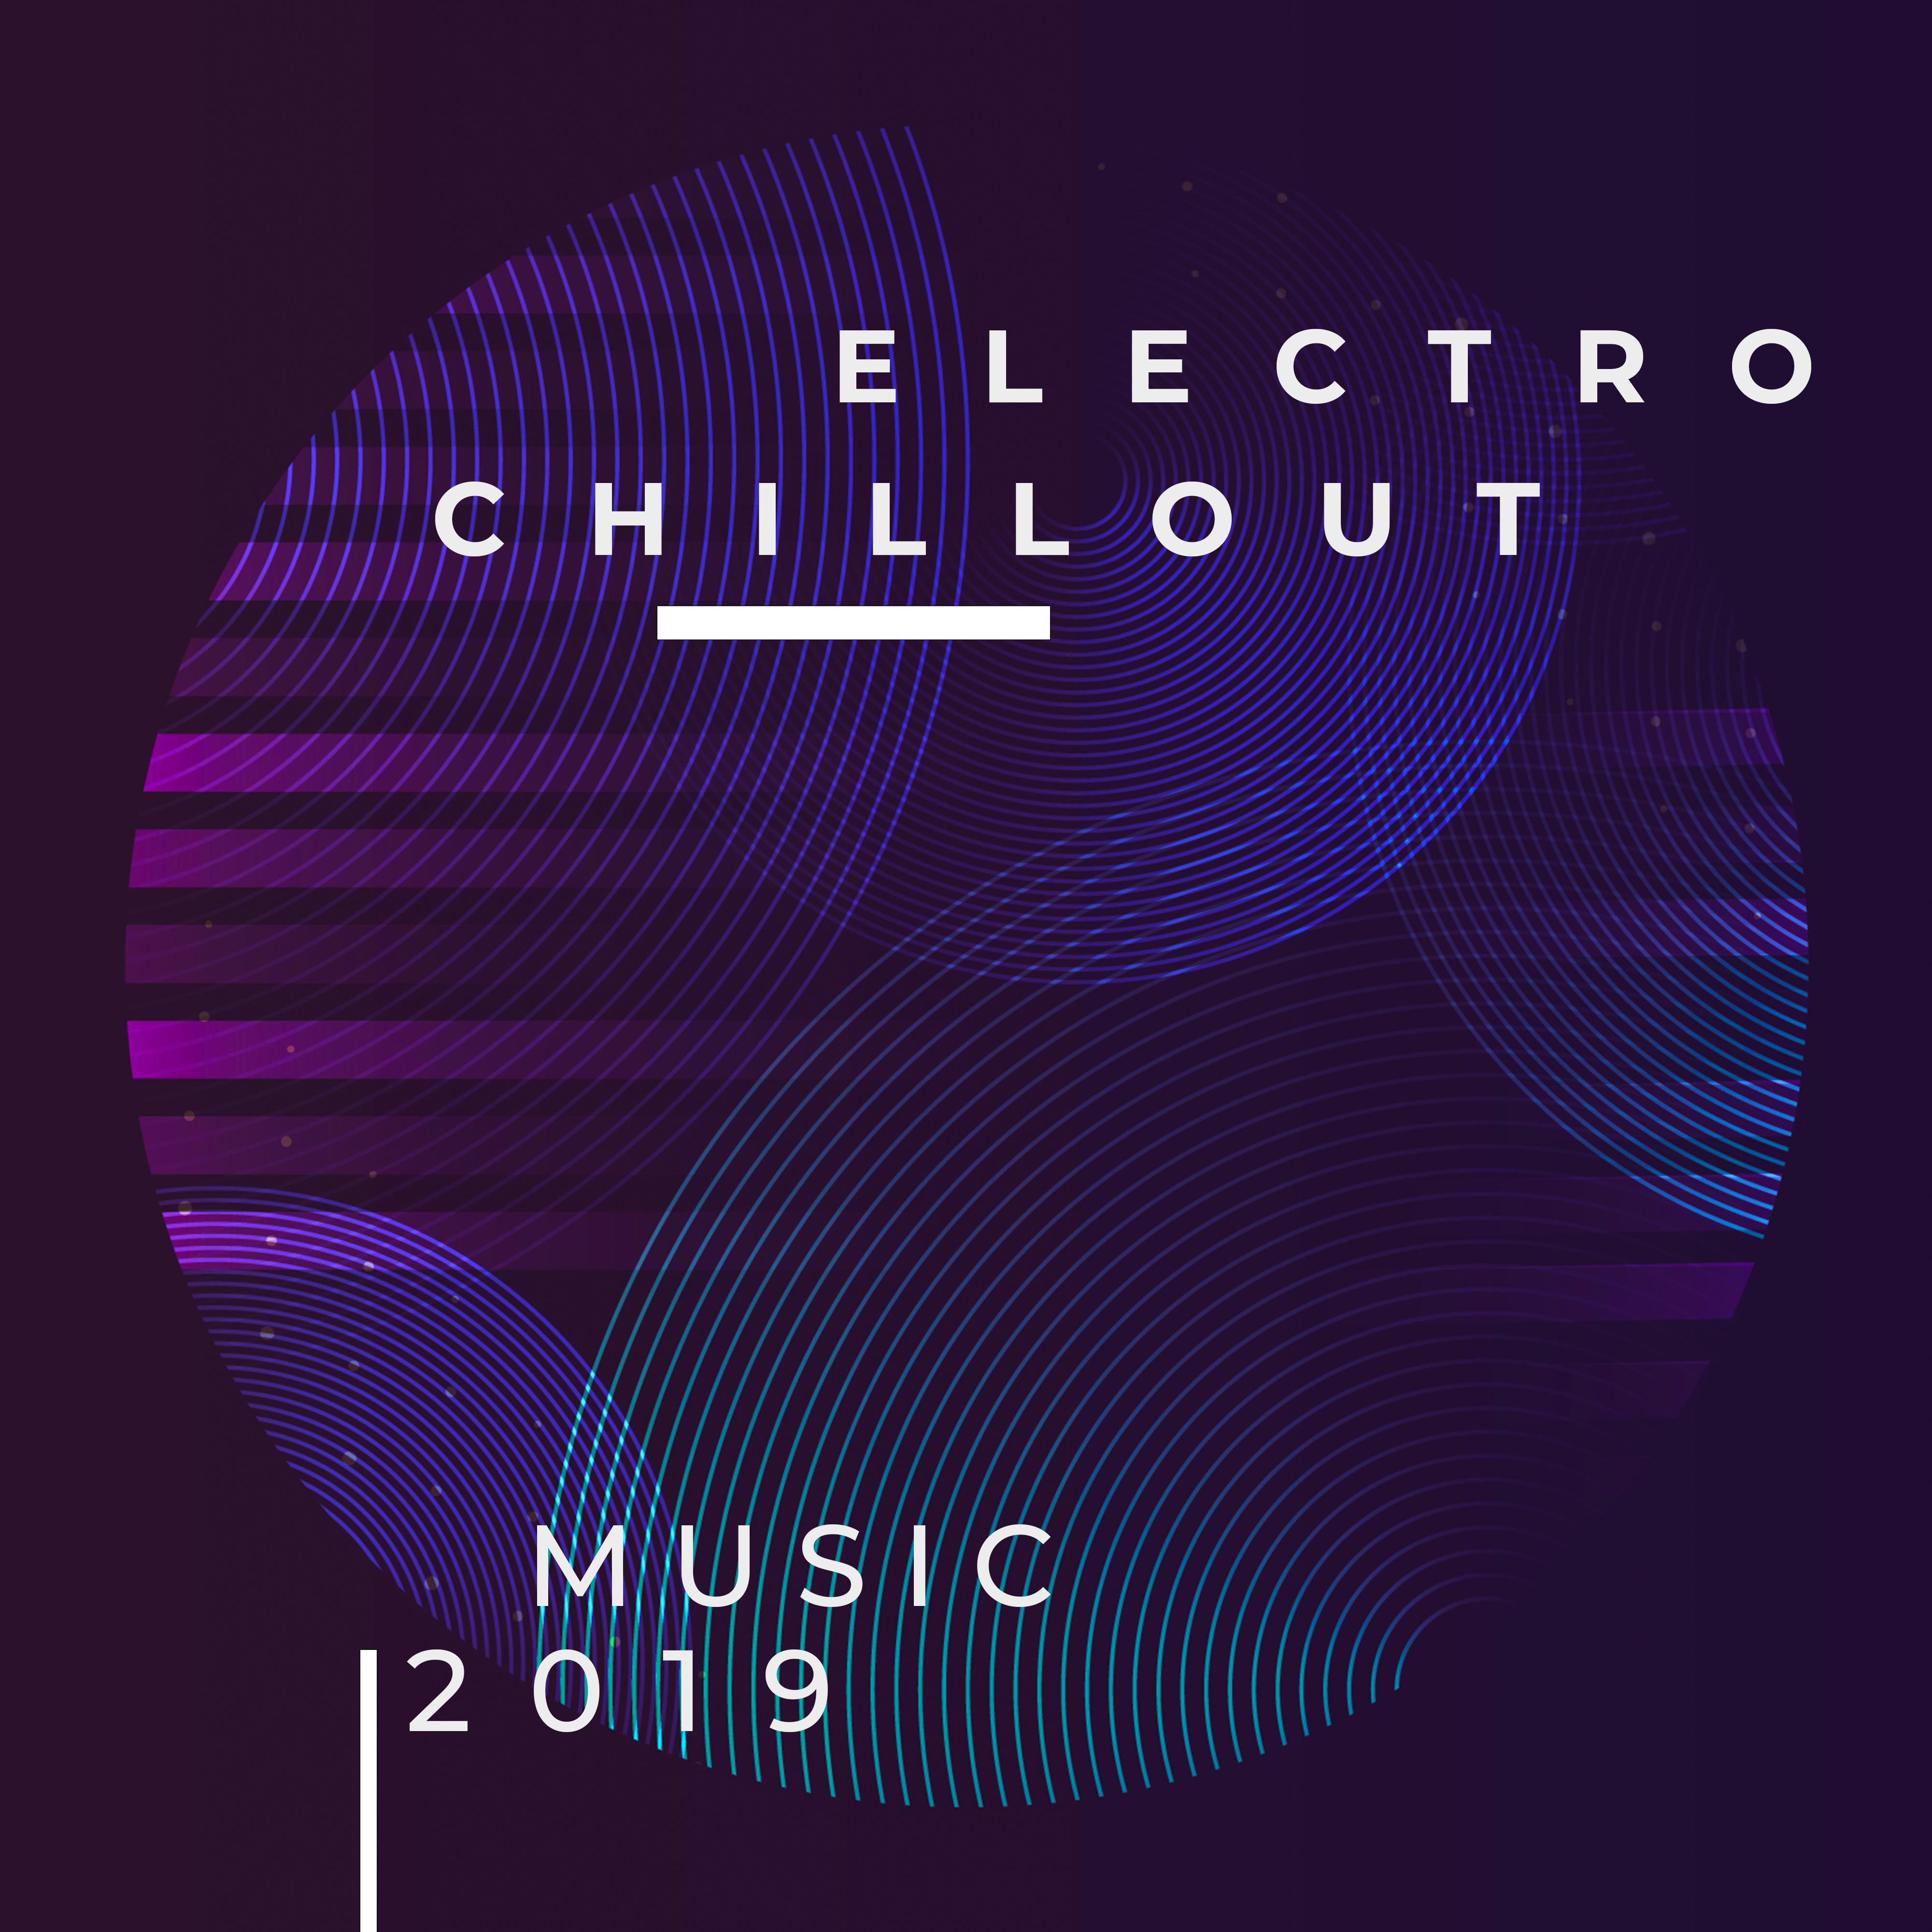 Electro Chillout Music 2019